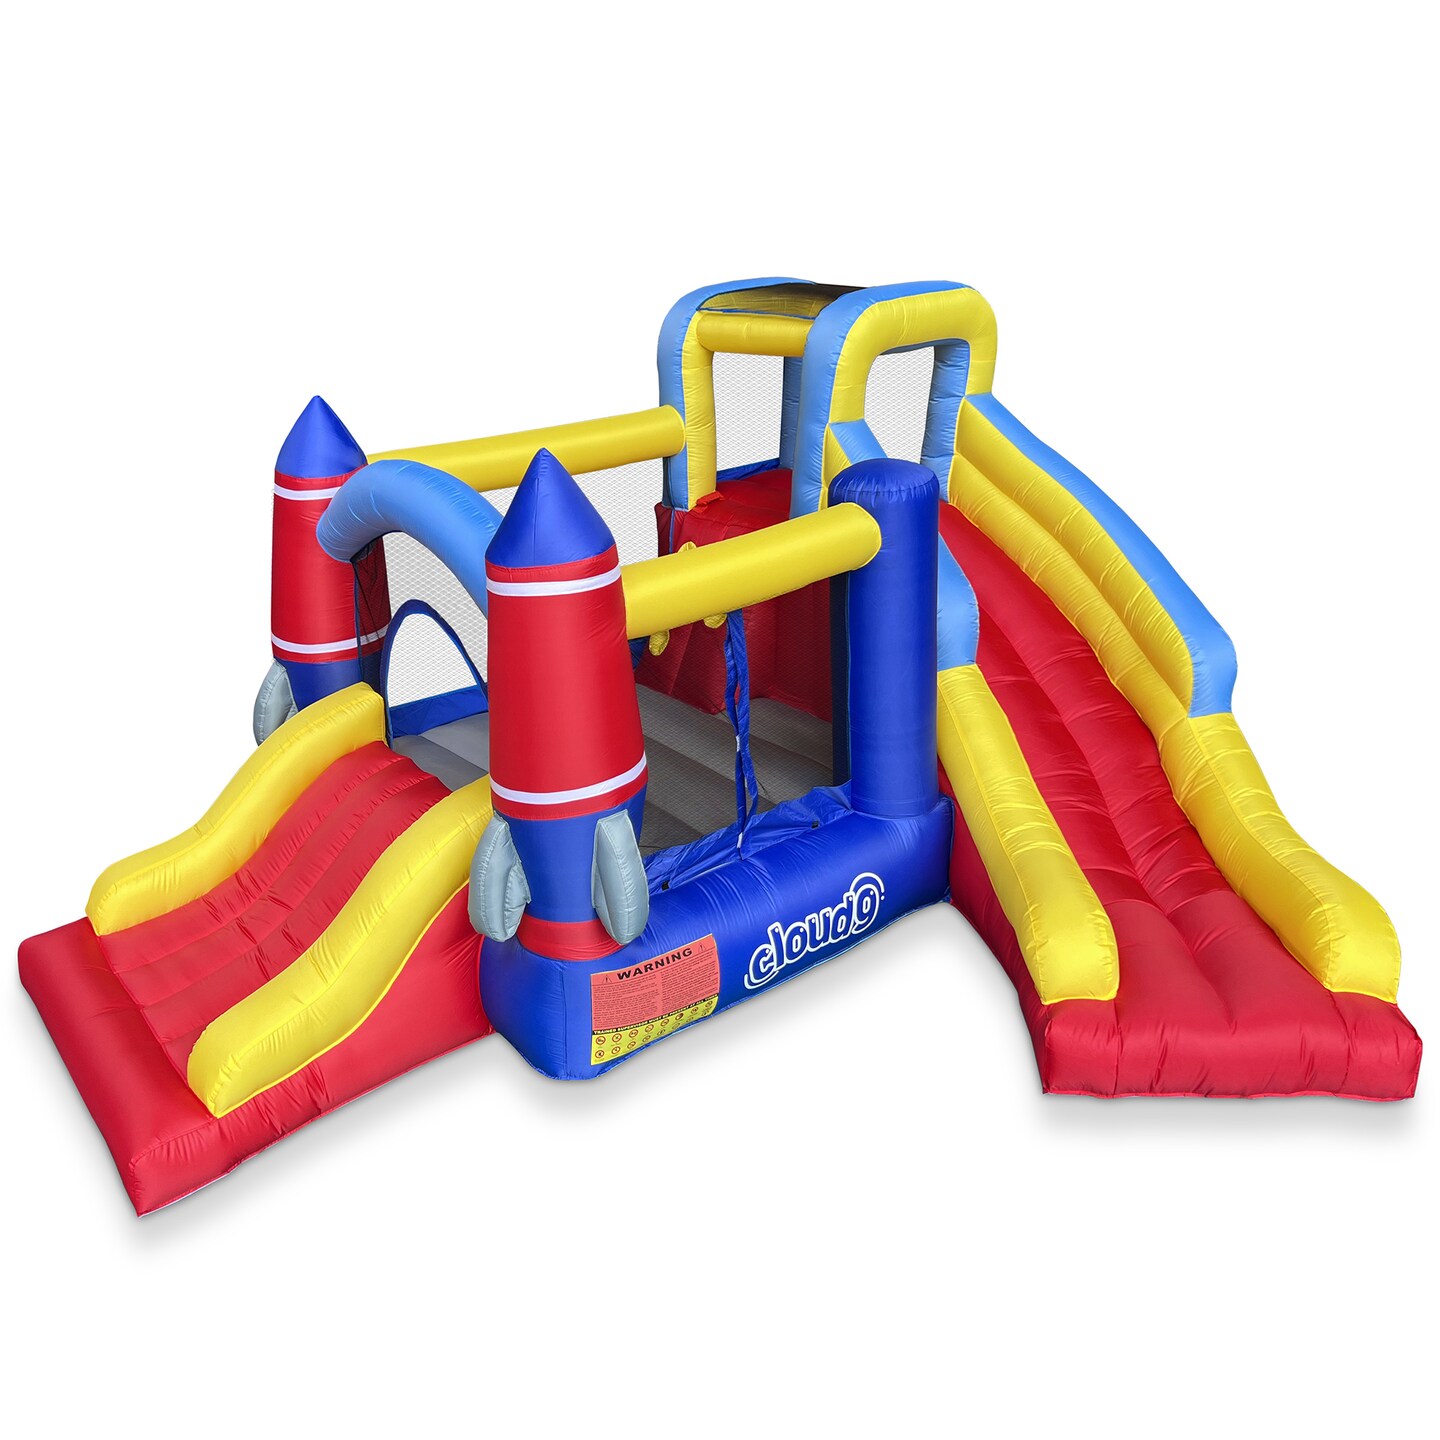 Cloud 9 Inflatable Rocket Bounce House with Blower, Bouncer for Kids with Two Slides and Large Jumping Area